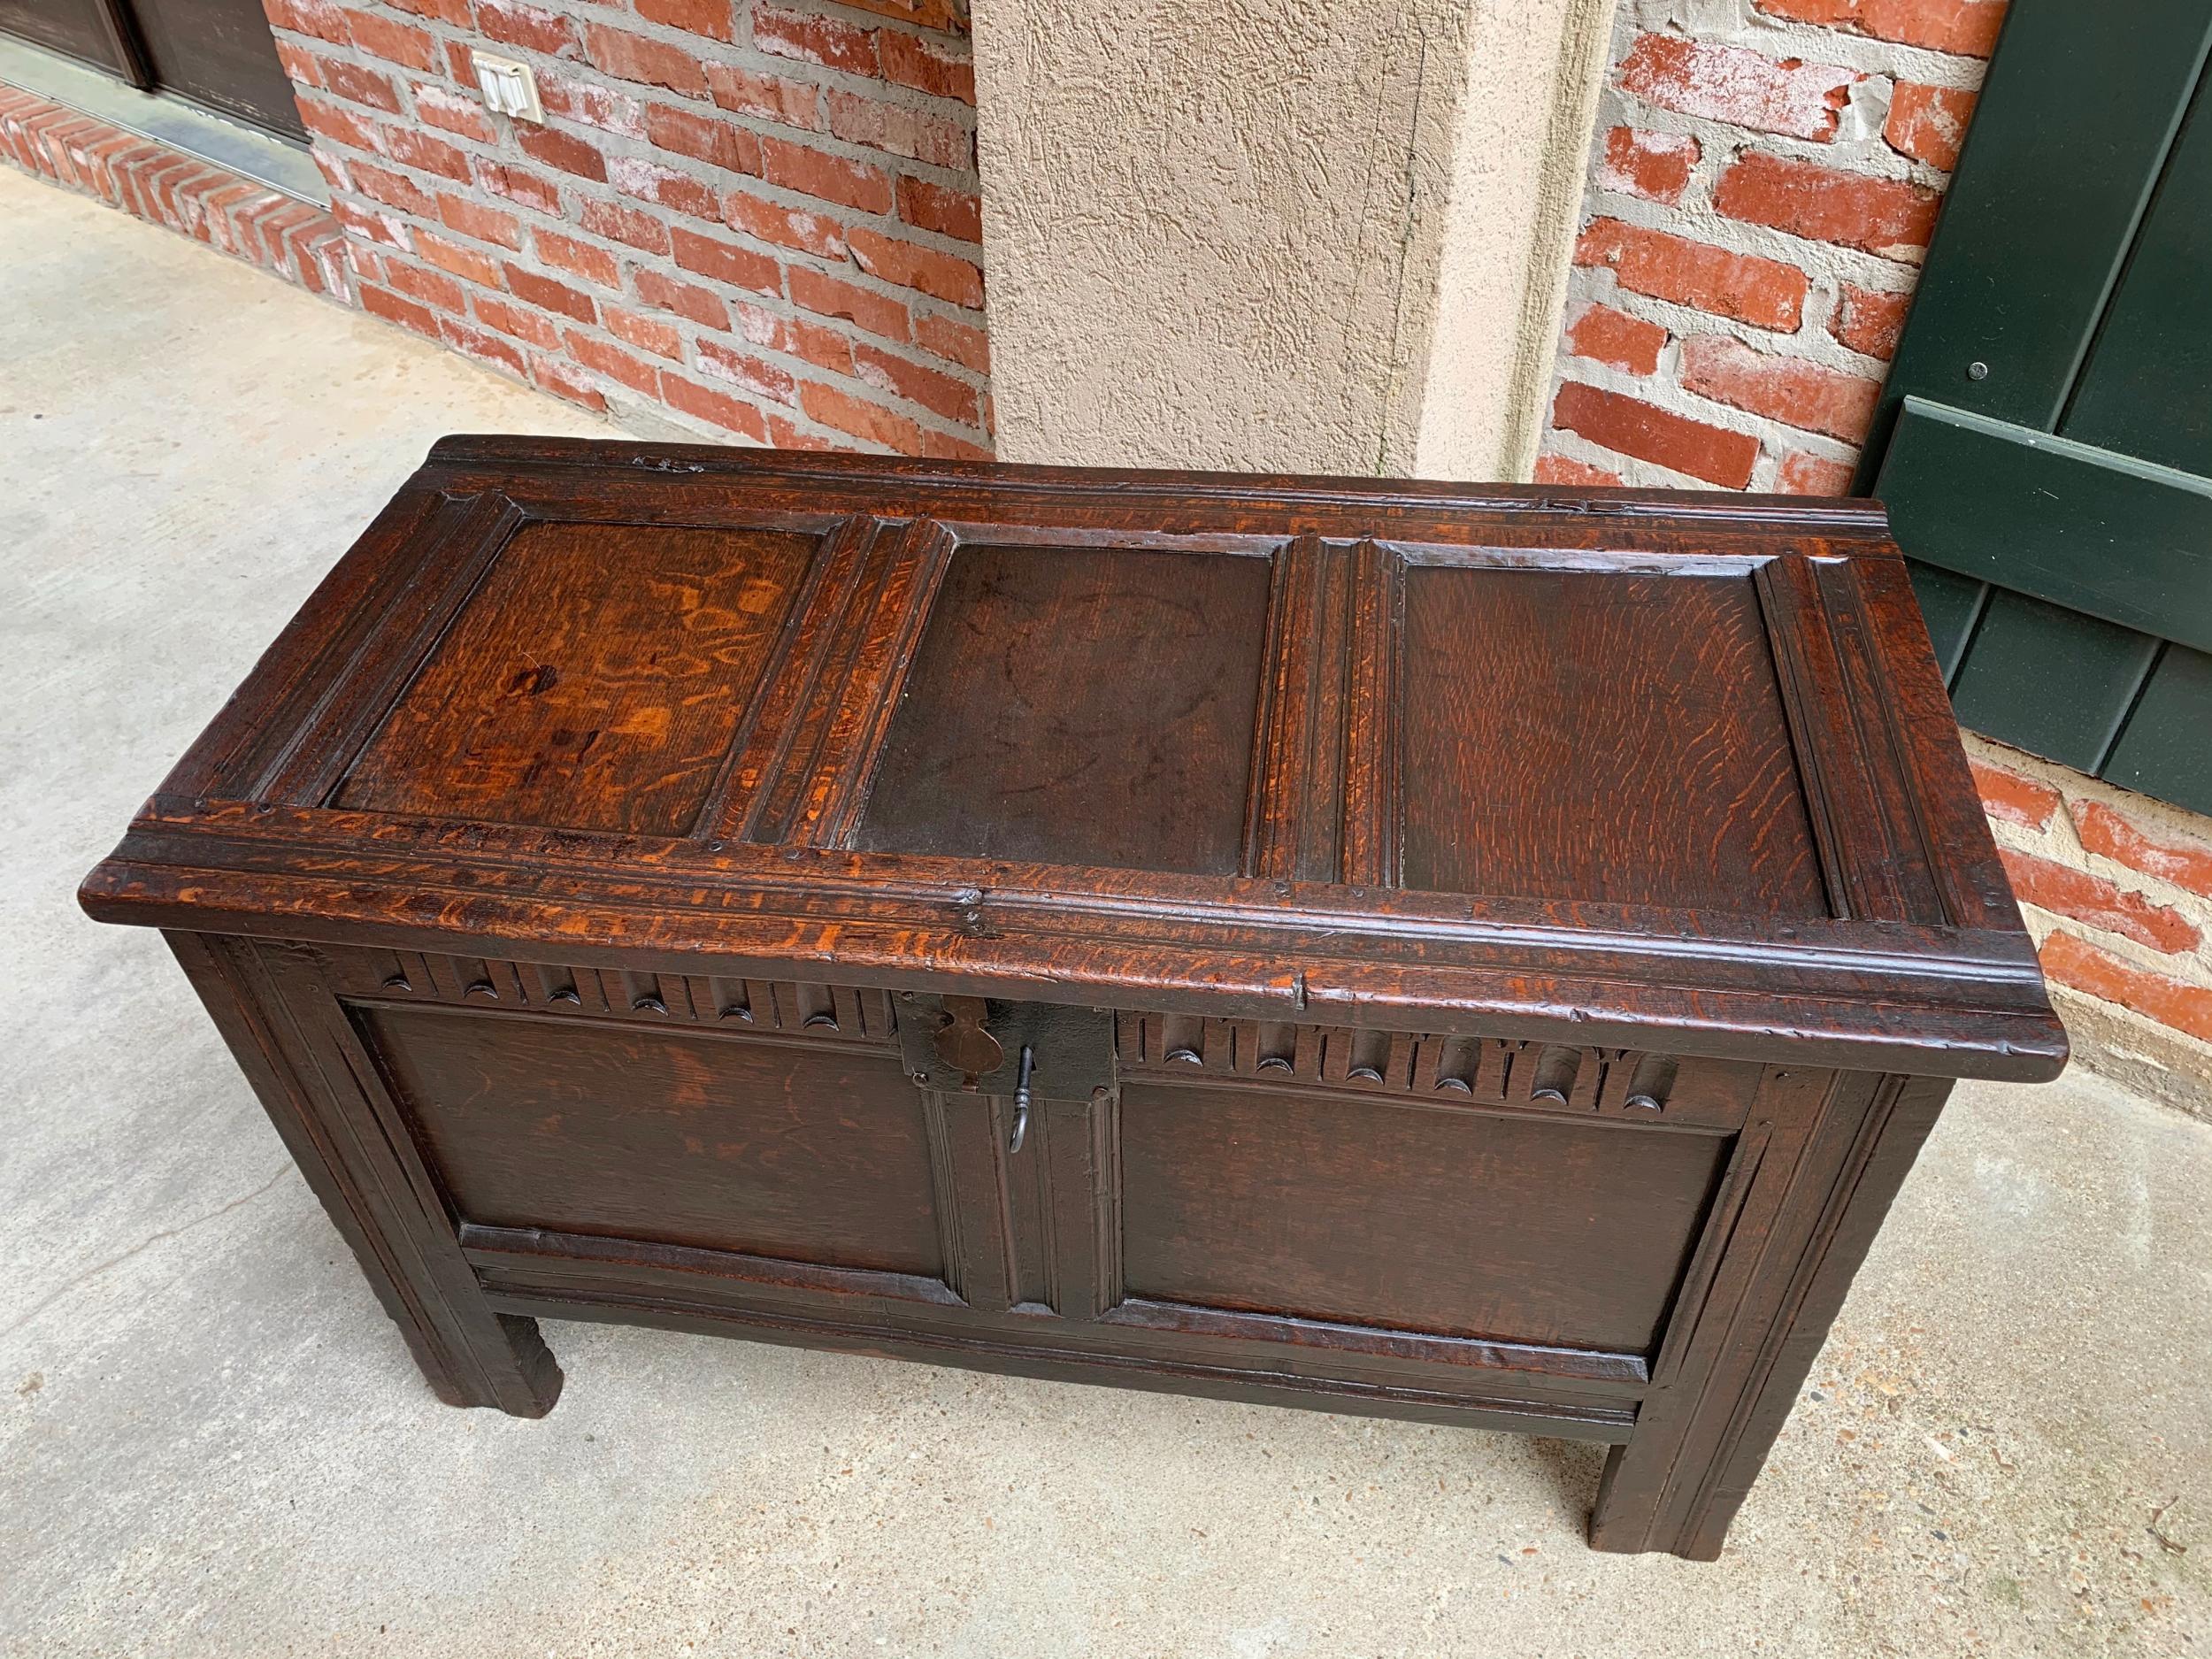 British Antique English Carved Oak Coffer Trunk Chest Coffee Table Blanket Box c1770 For Sale